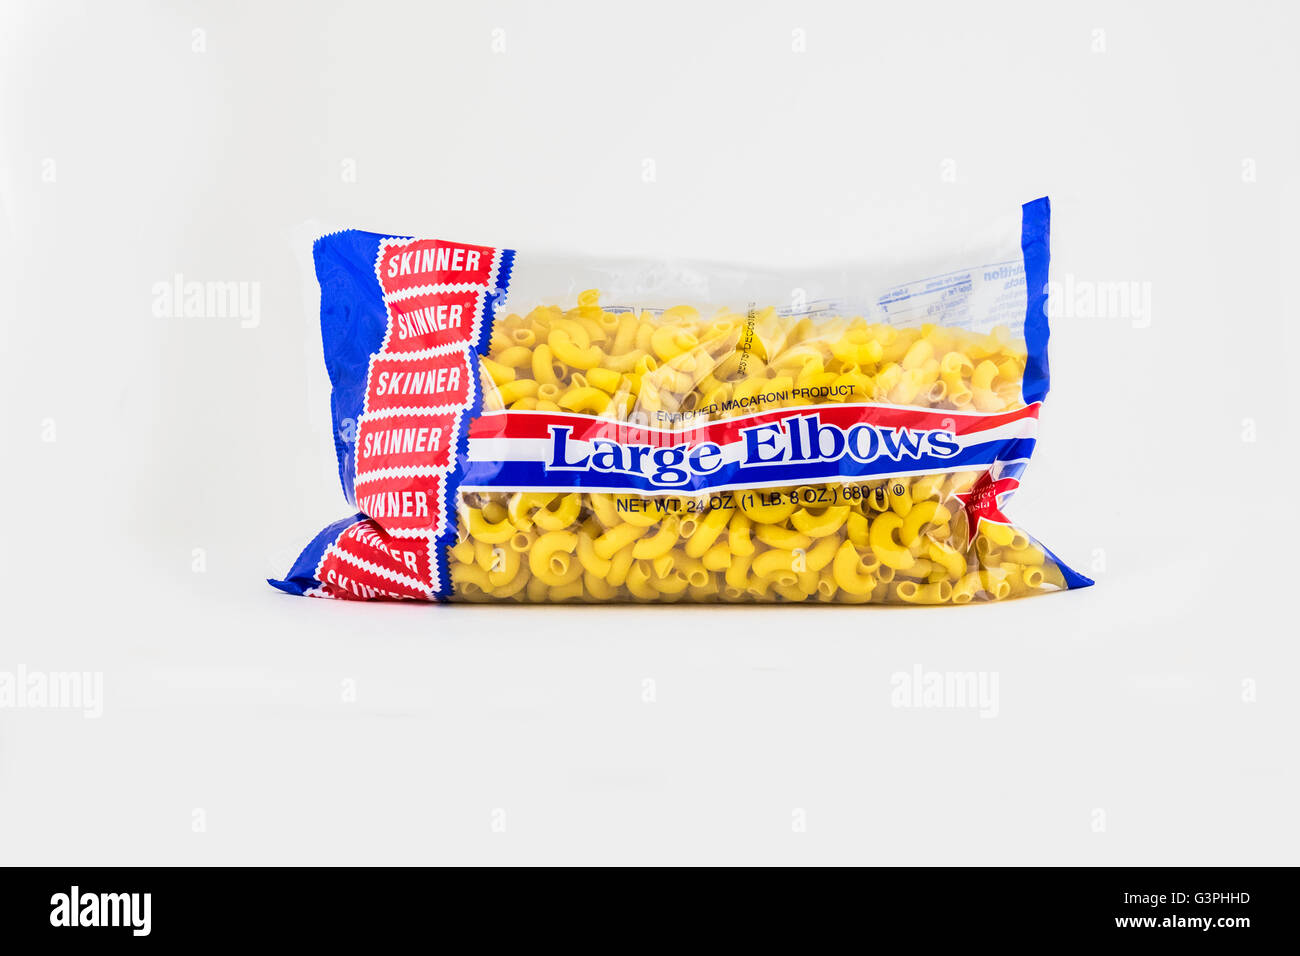 A 24 oz package of Skinner Large Elbows macaroni. USA. Stock Photo